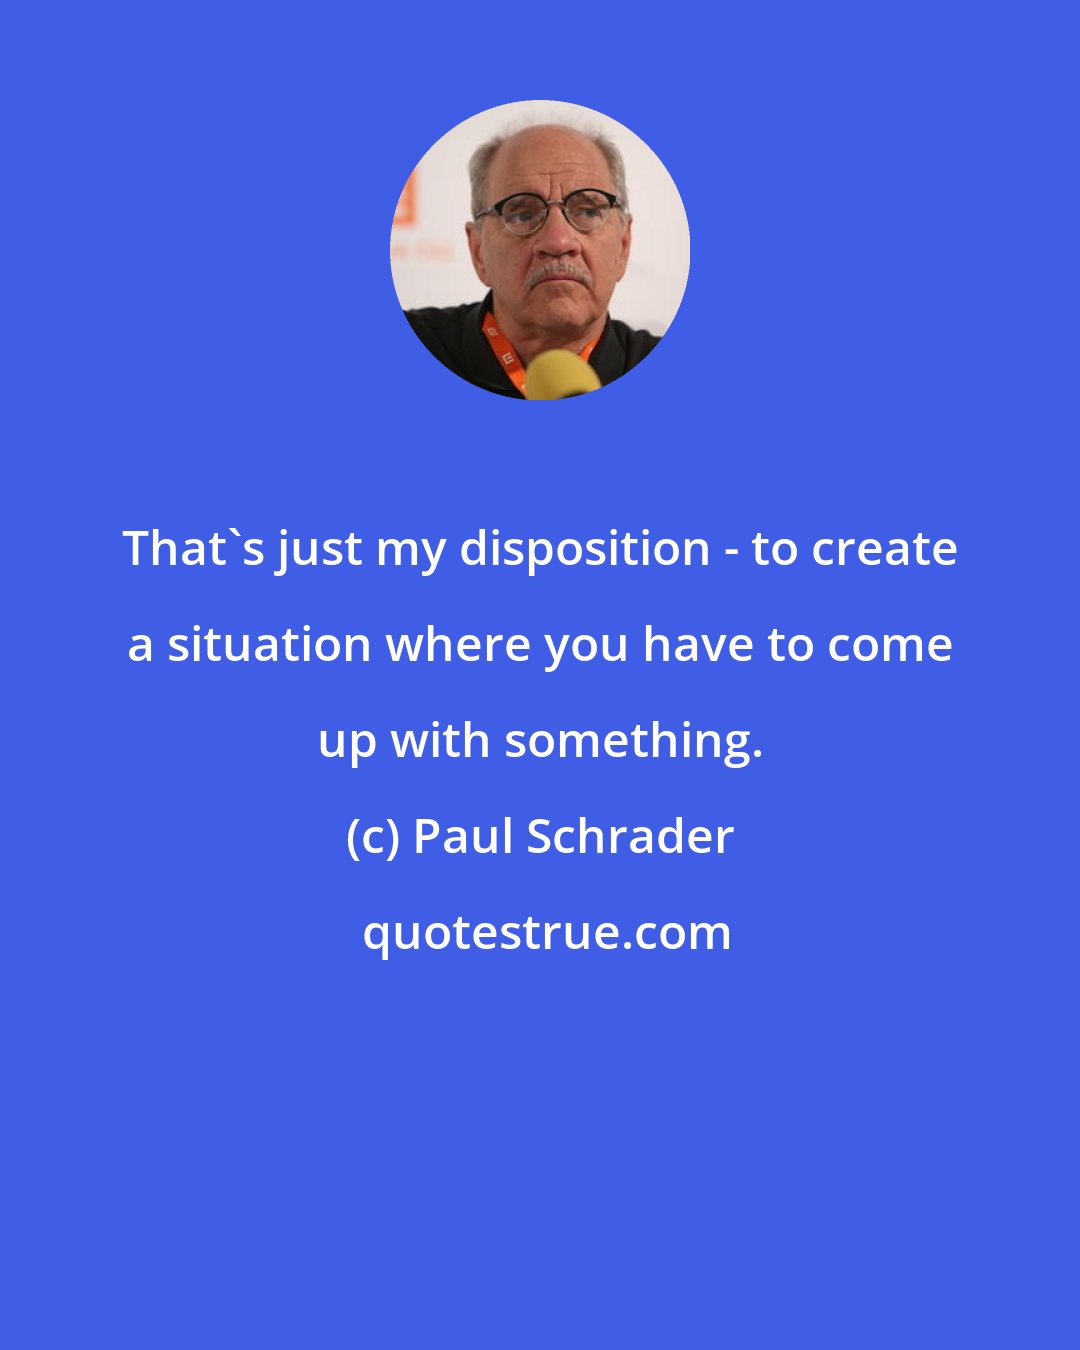 Paul Schrader: That's just my disposition - to create a situation where you have to come up with something.